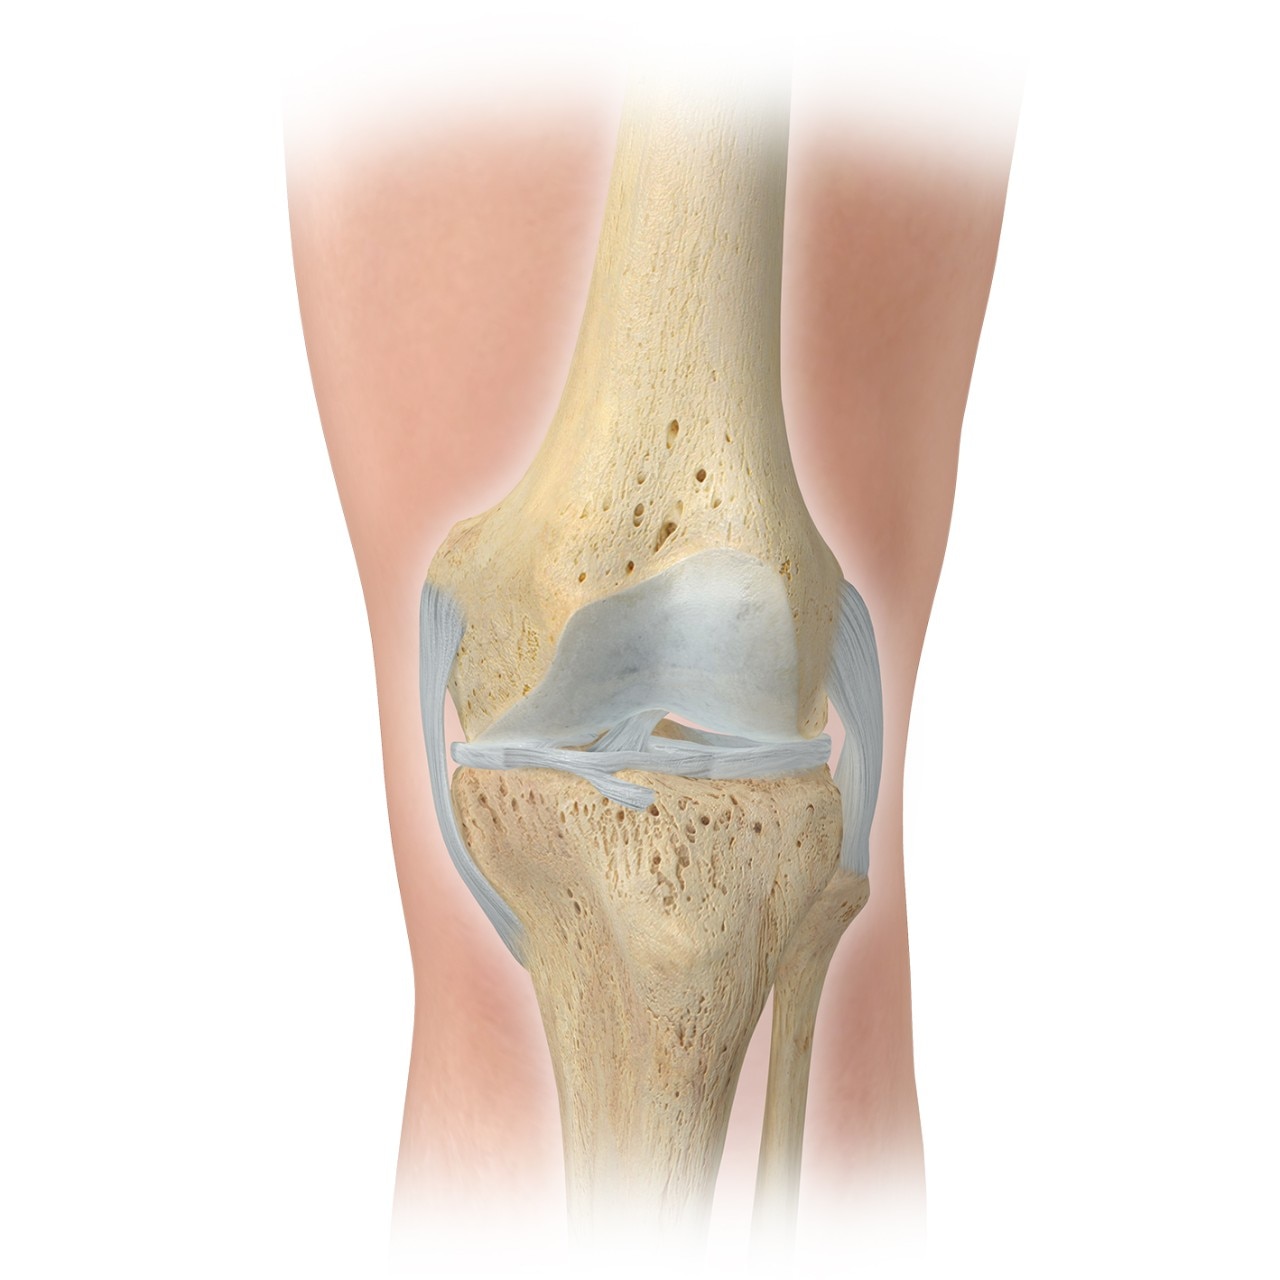 anterior knee - recovering from joint replacement surgery